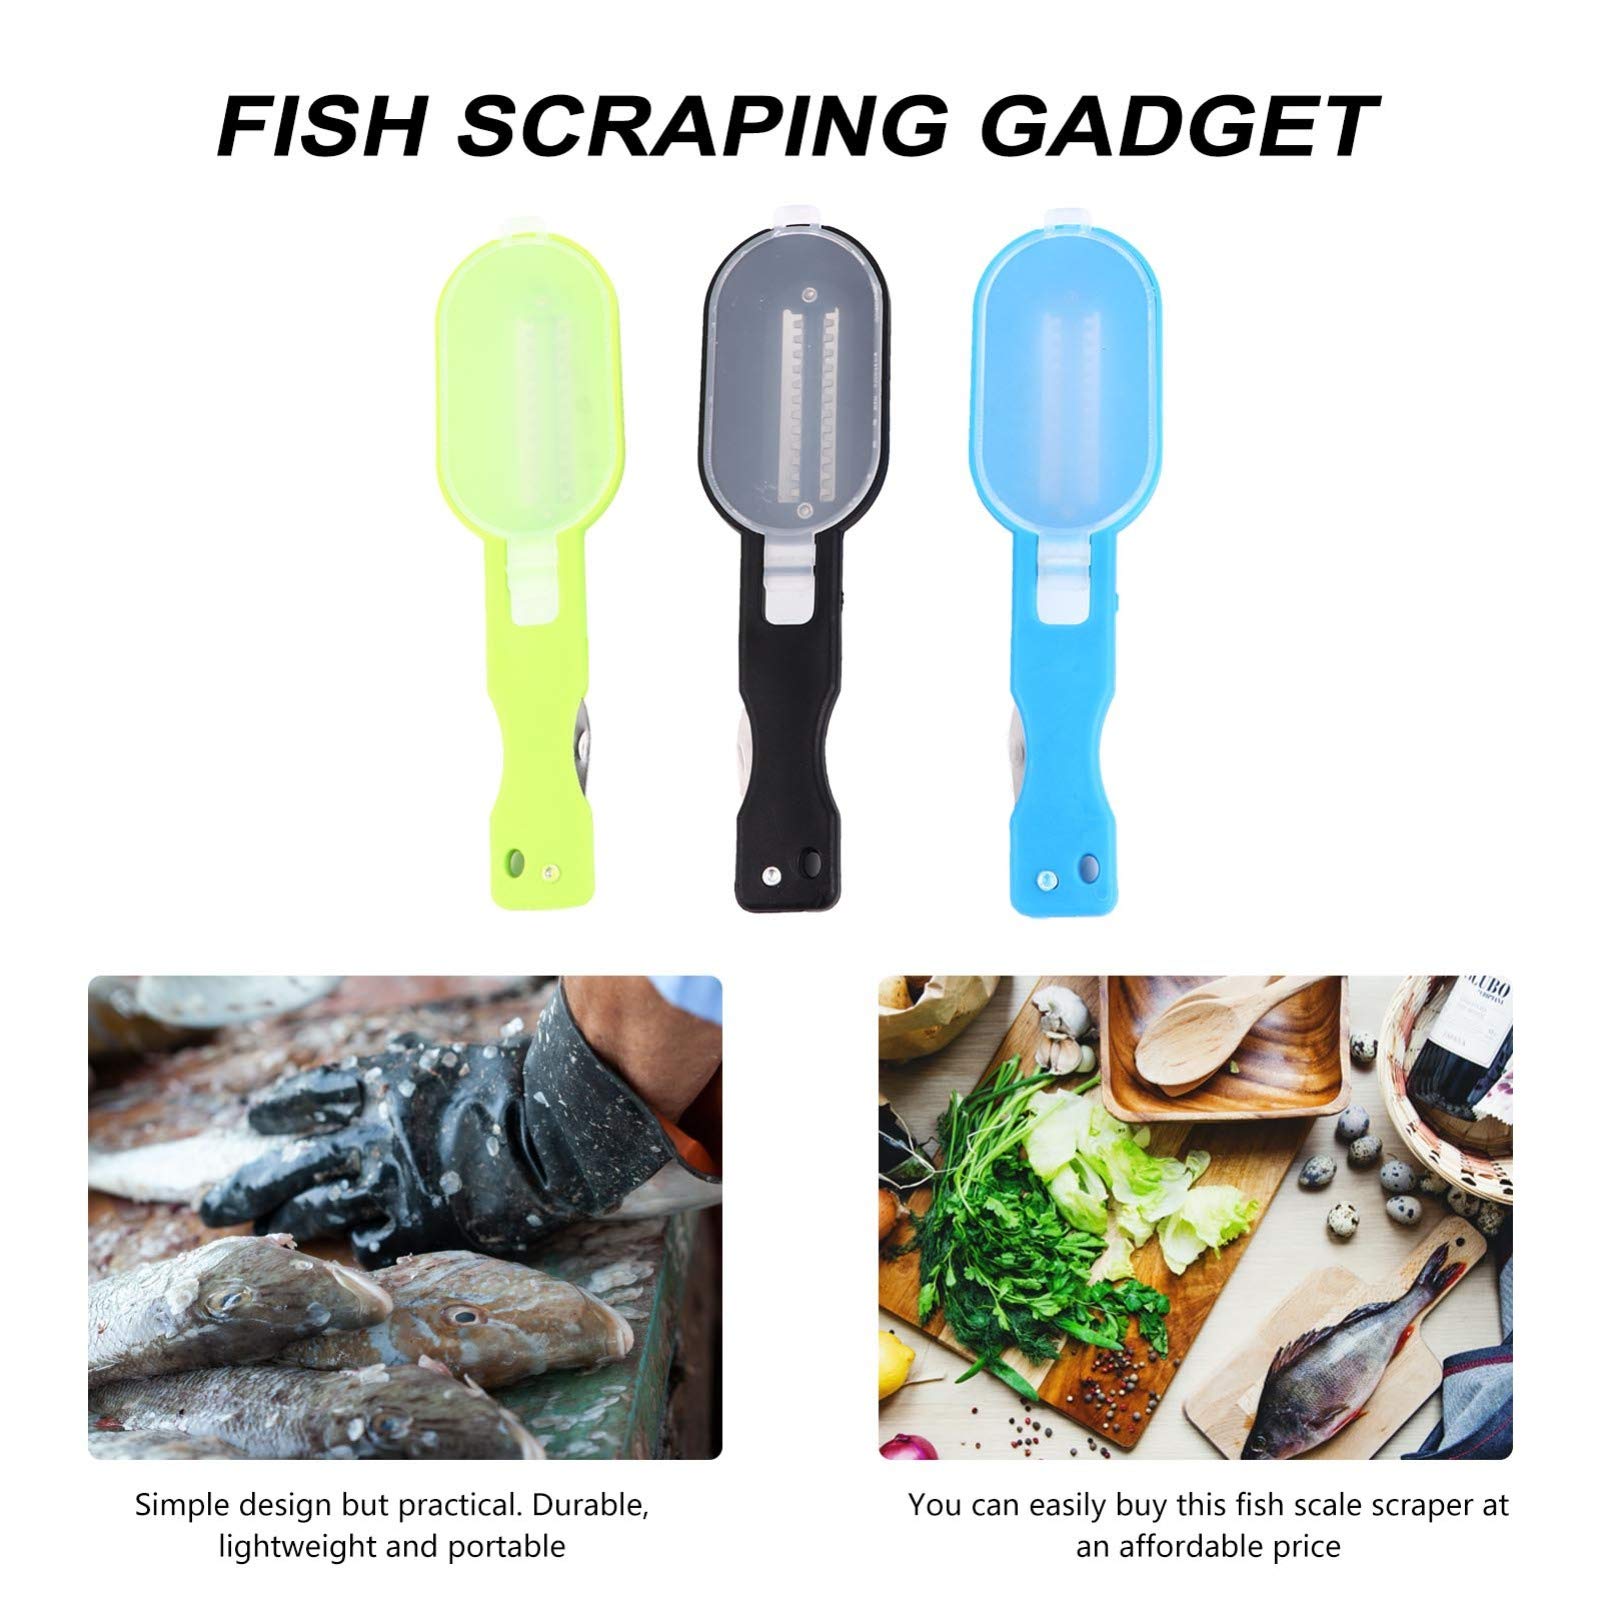 Happyyami 3pcs Fish Skin Scaler with Clear Cover Stainless Steel Fish Scale Remover Plastic Scale Scraper Plastic Fish Scale Scraper Remover Kitchen Gadgets Clean Tools (Random Color)